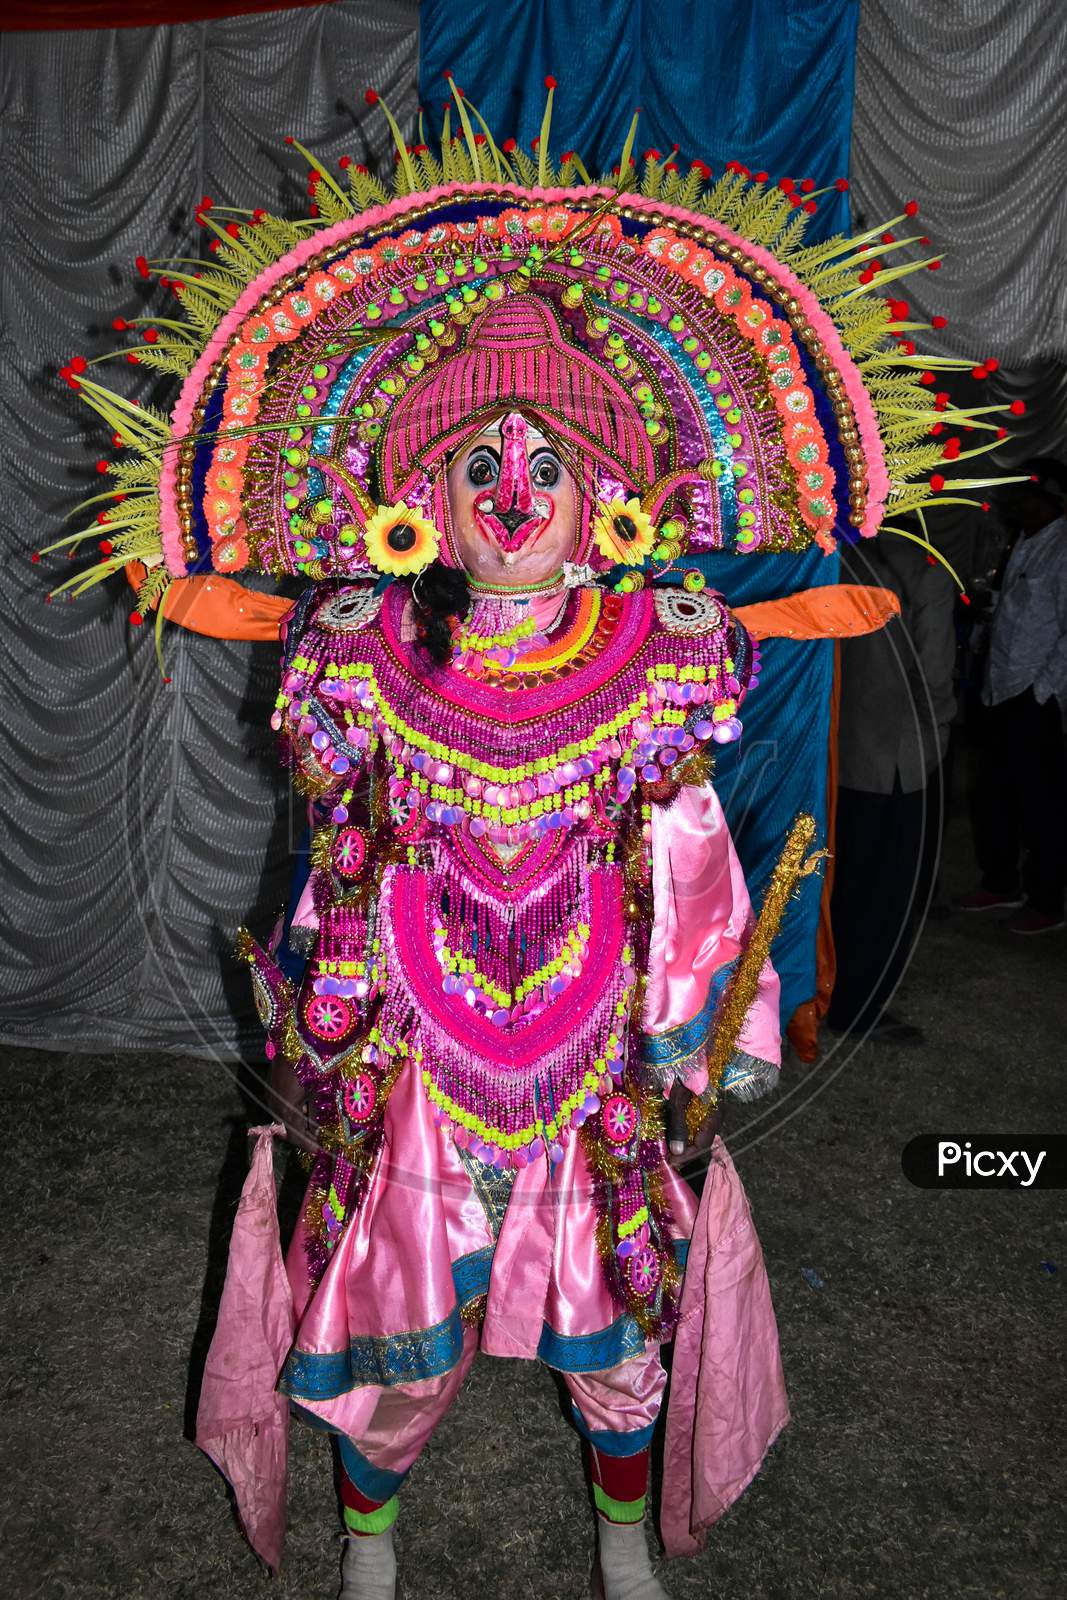 Chhau Dance Is A Popular Form Of Tribal Dance In India That Incorporates Elements Of Martial Arts